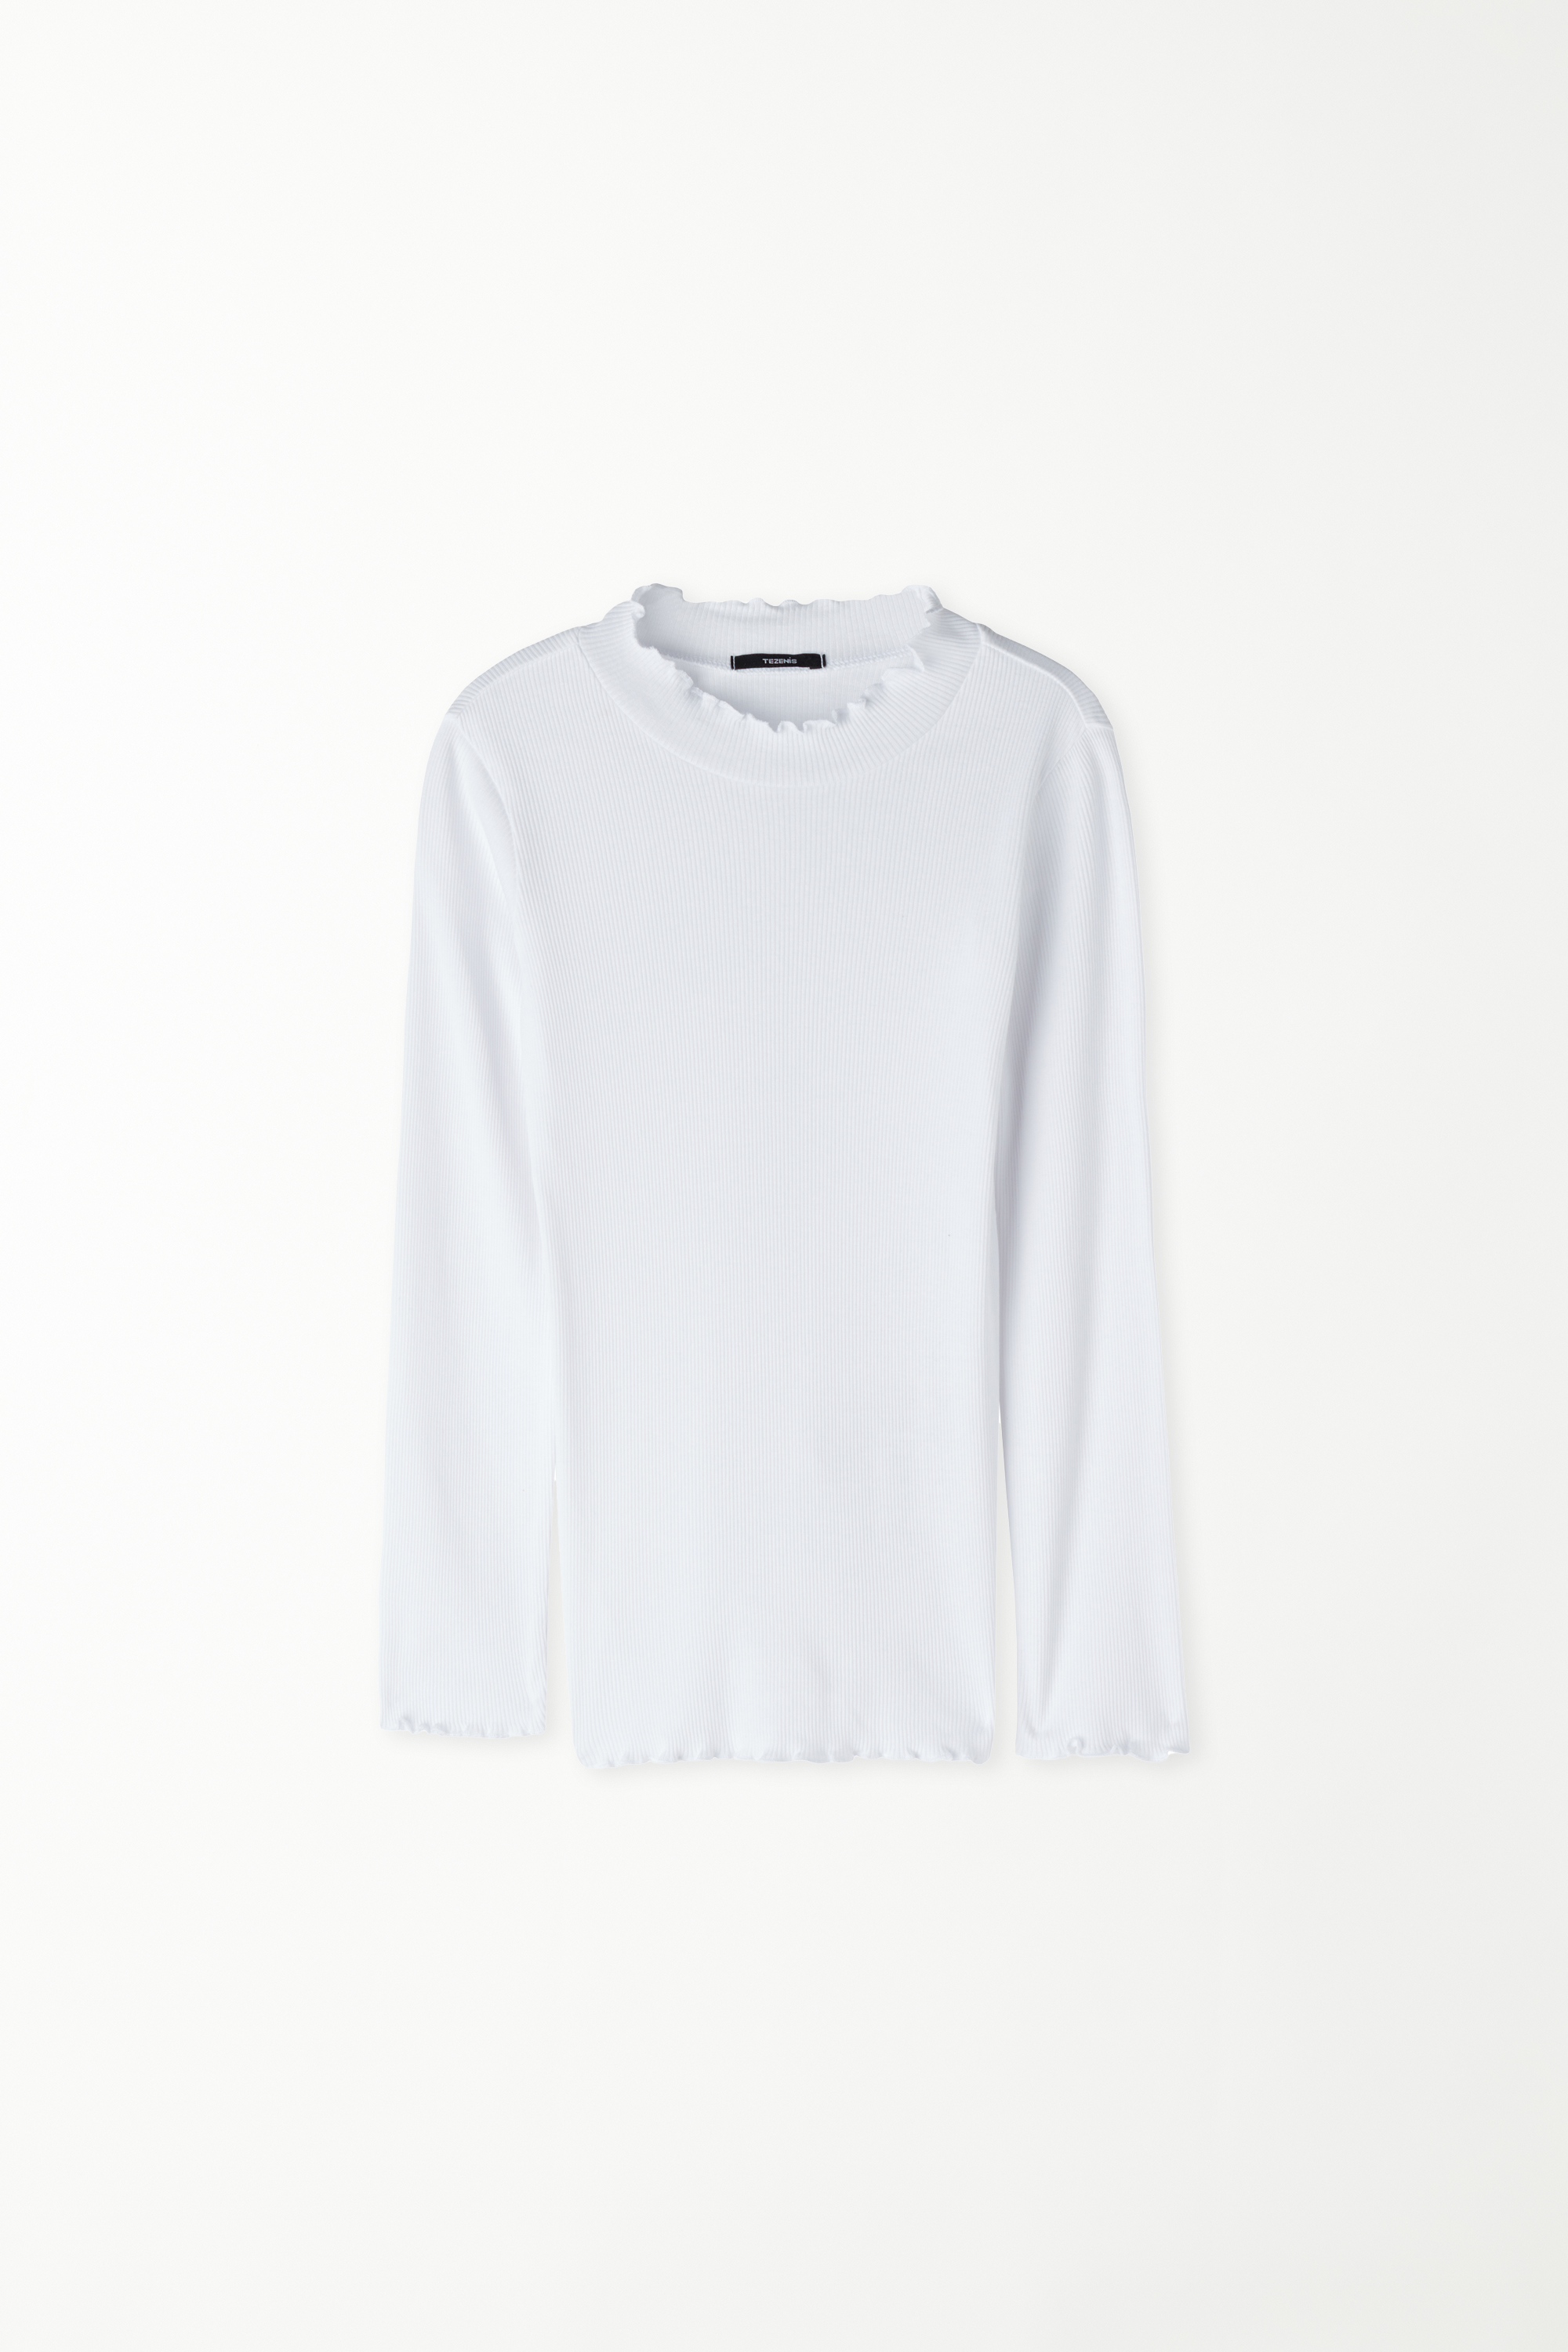 Girls’ Long Sleeve Ribbed Top with Rolled Hem